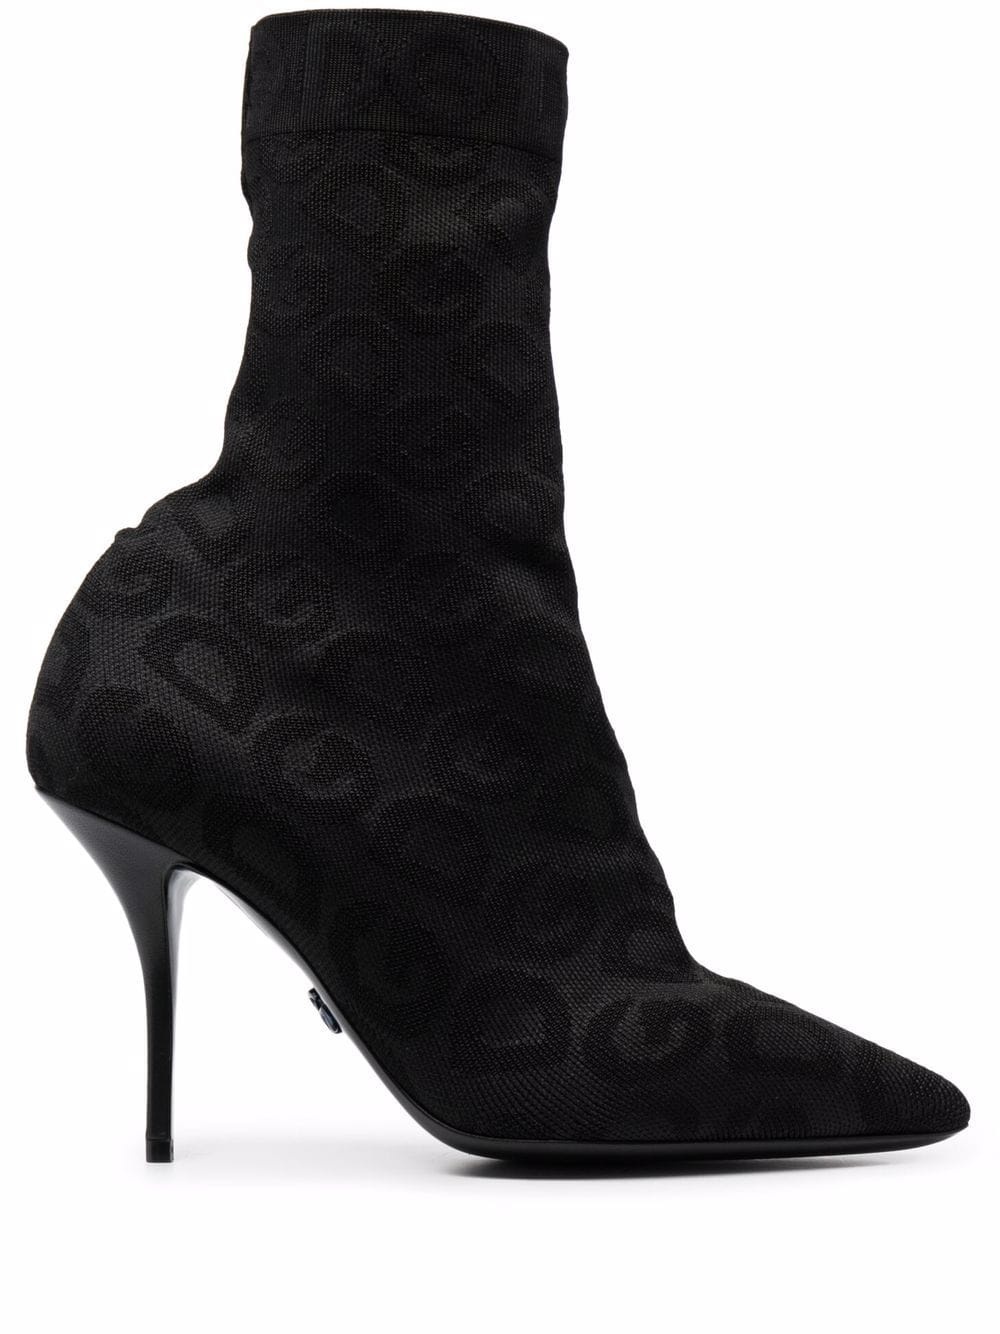 monogram ankle boots - 1